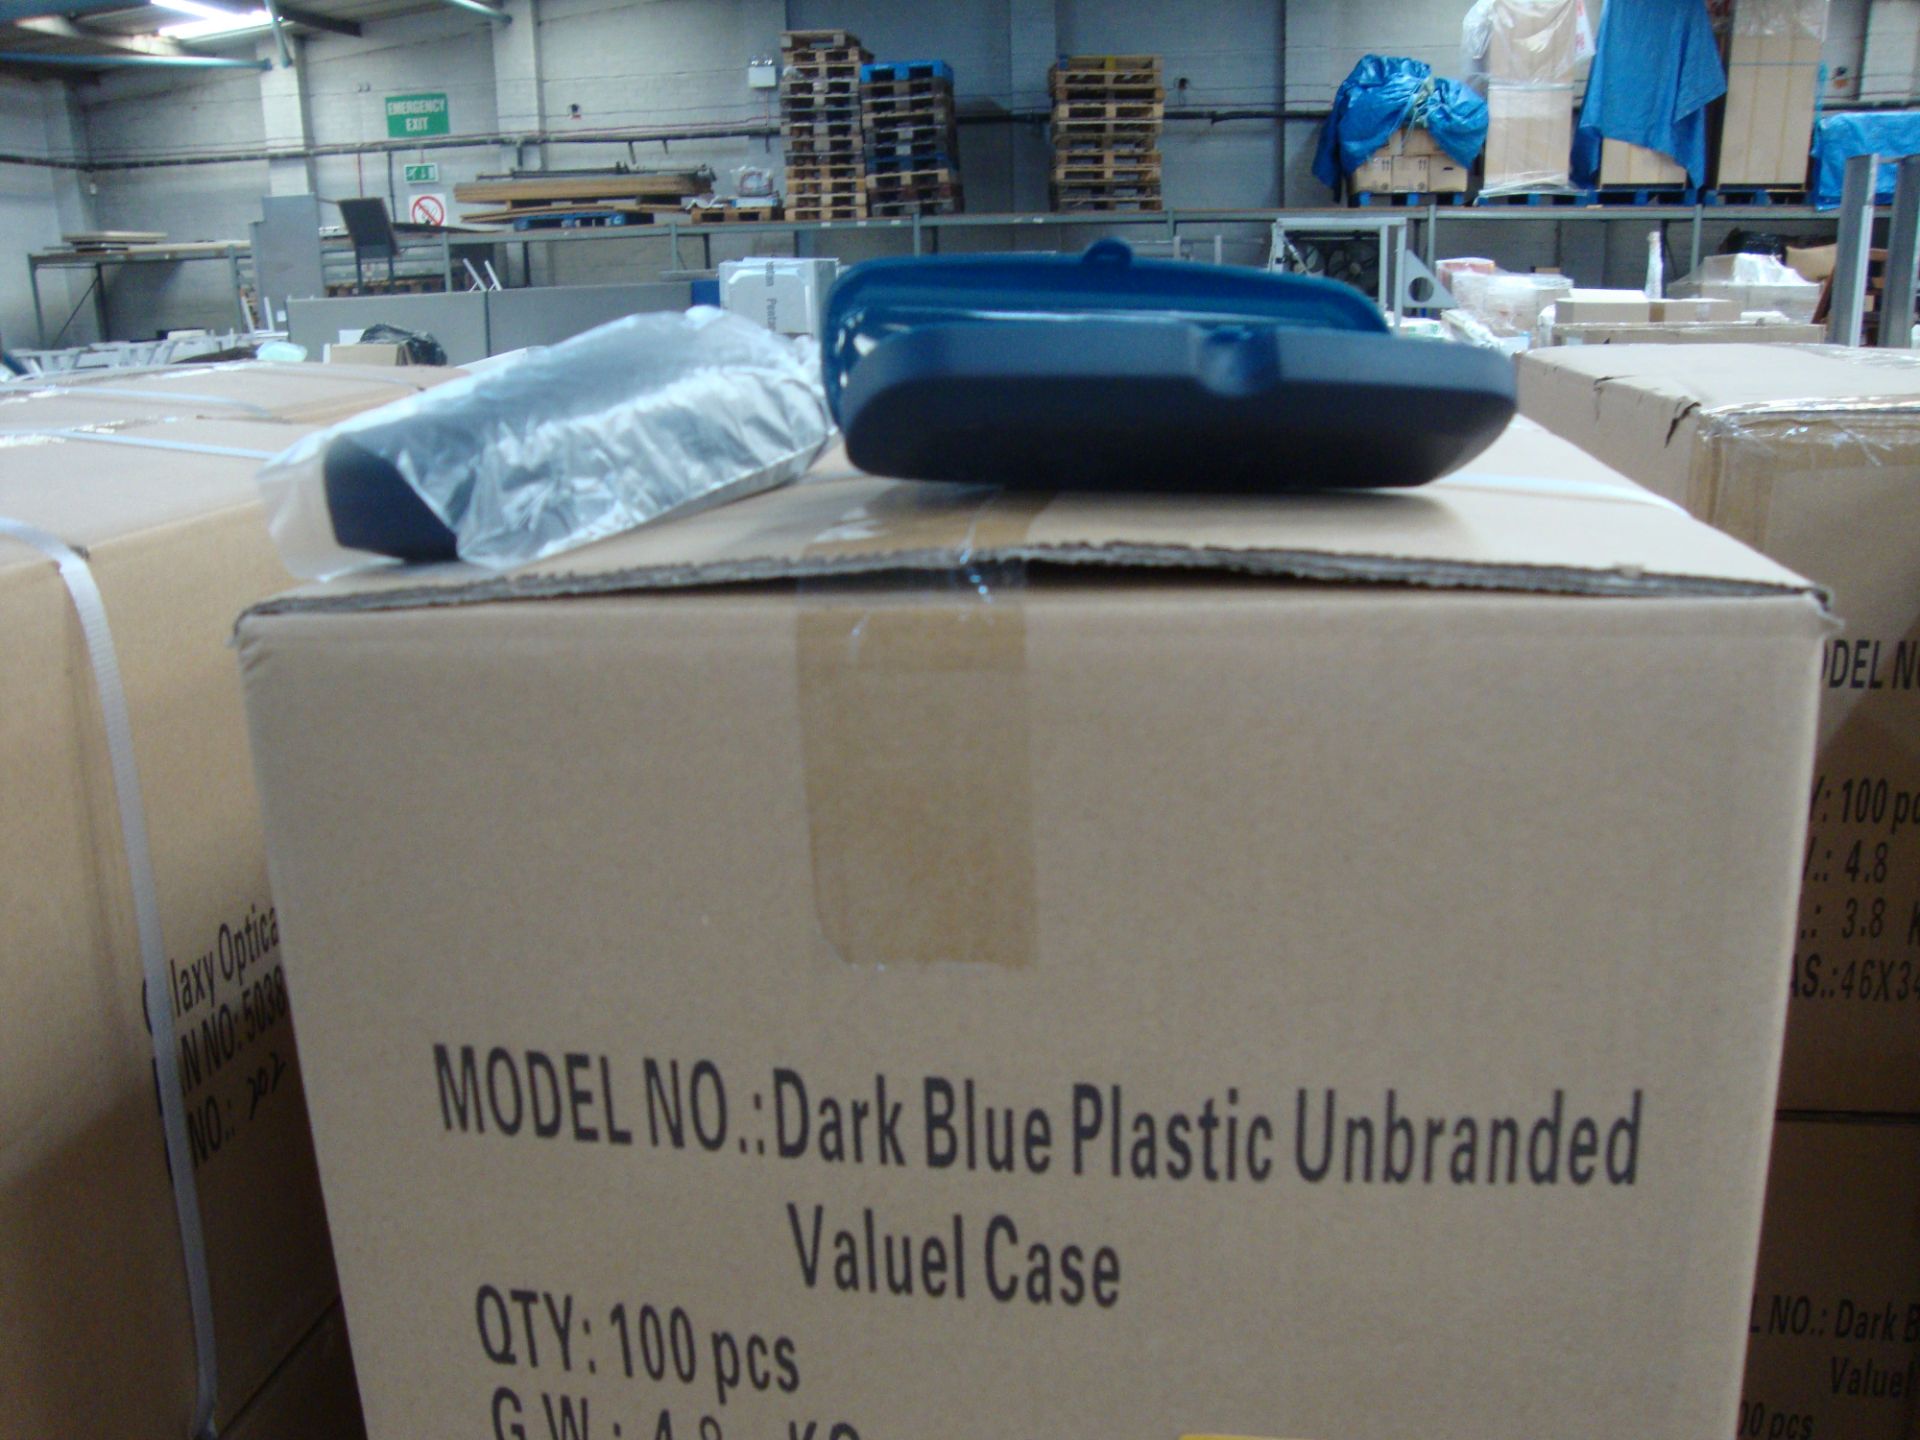 20 boxes containing a total of 2,000 dark blue plastic unbranded glasses/sunglasses cases All the